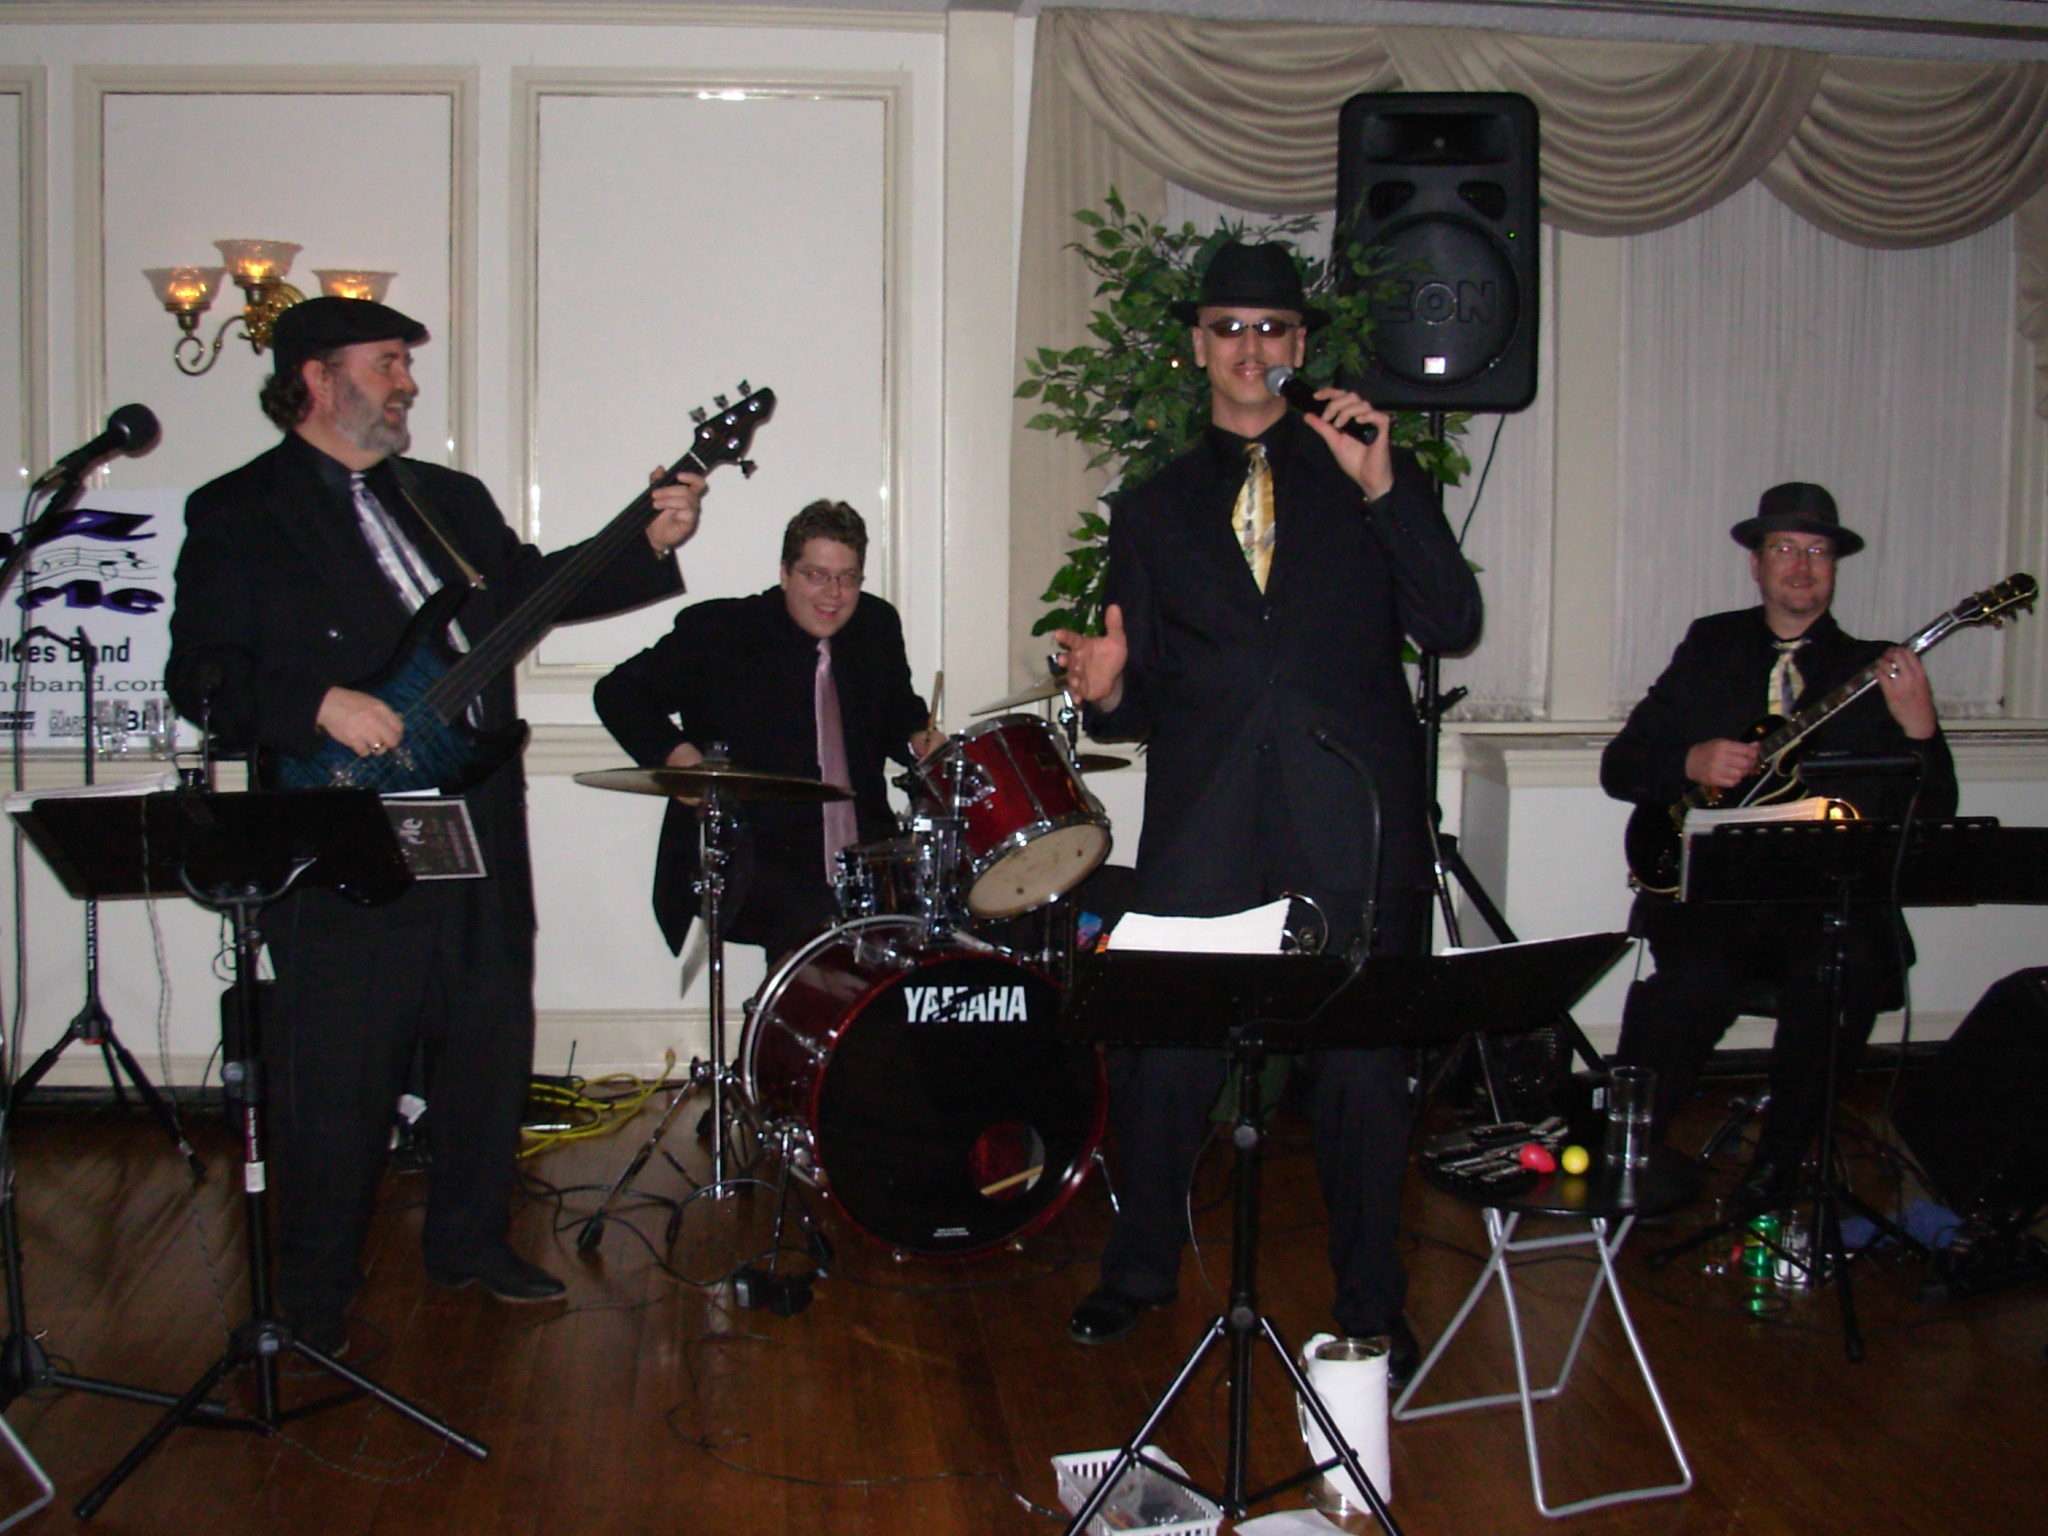 Performing at the Hamilton Club in Lancaster 4-2007
